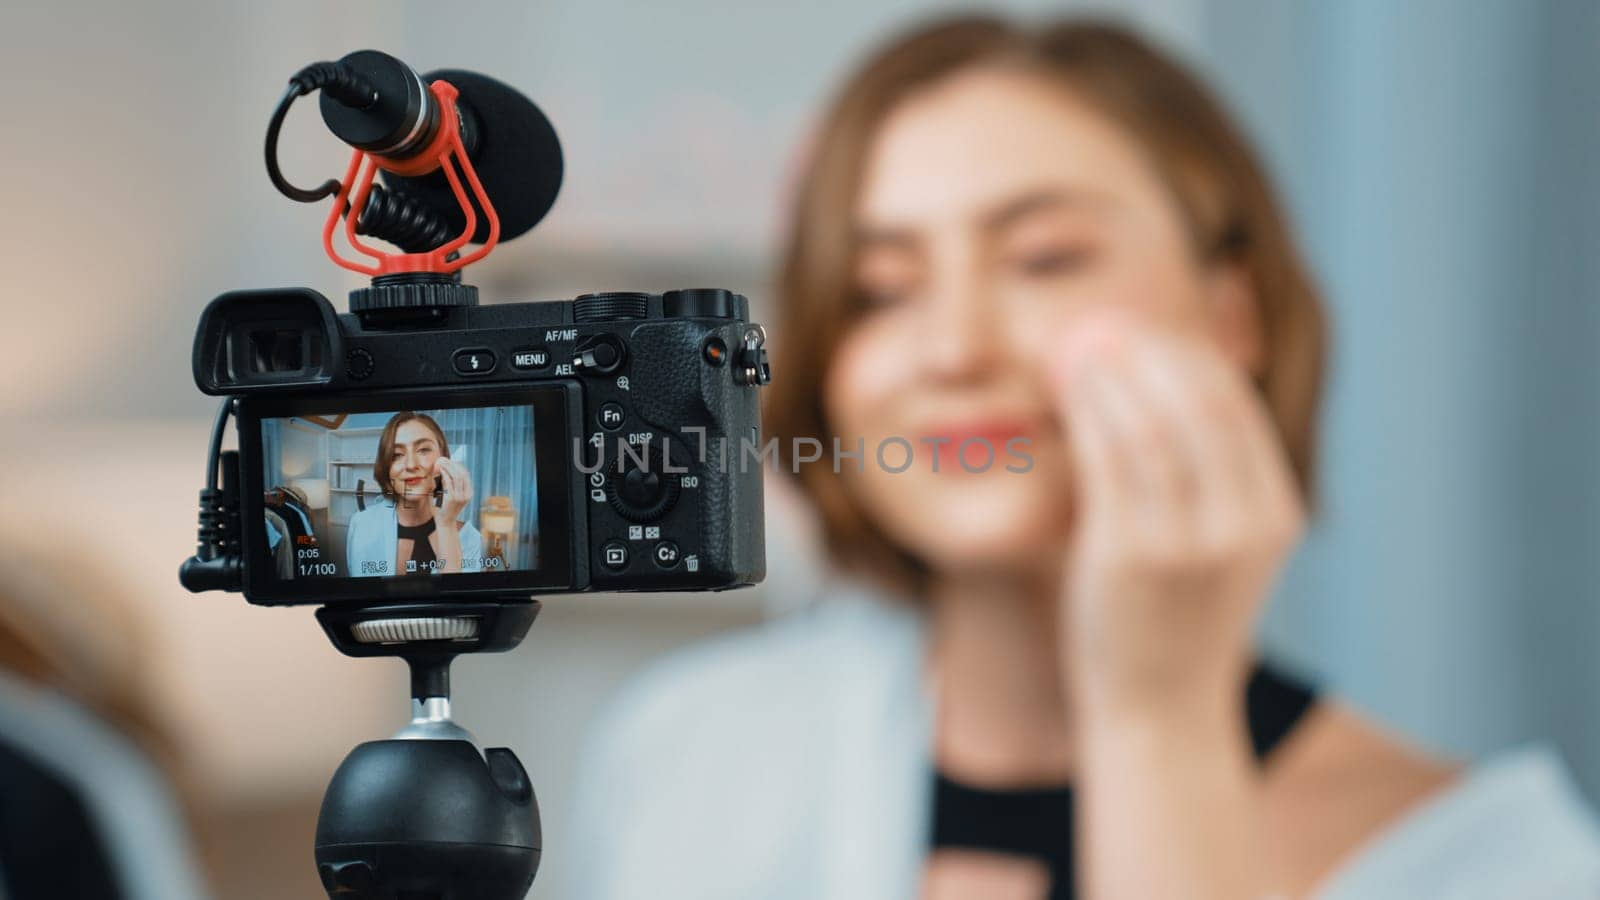 Rear view behide camera screen display influencer shoot live streaming vlog video review makeup prim social media or blog. Girl with cosmetics studio lighting for marketing recording session online.